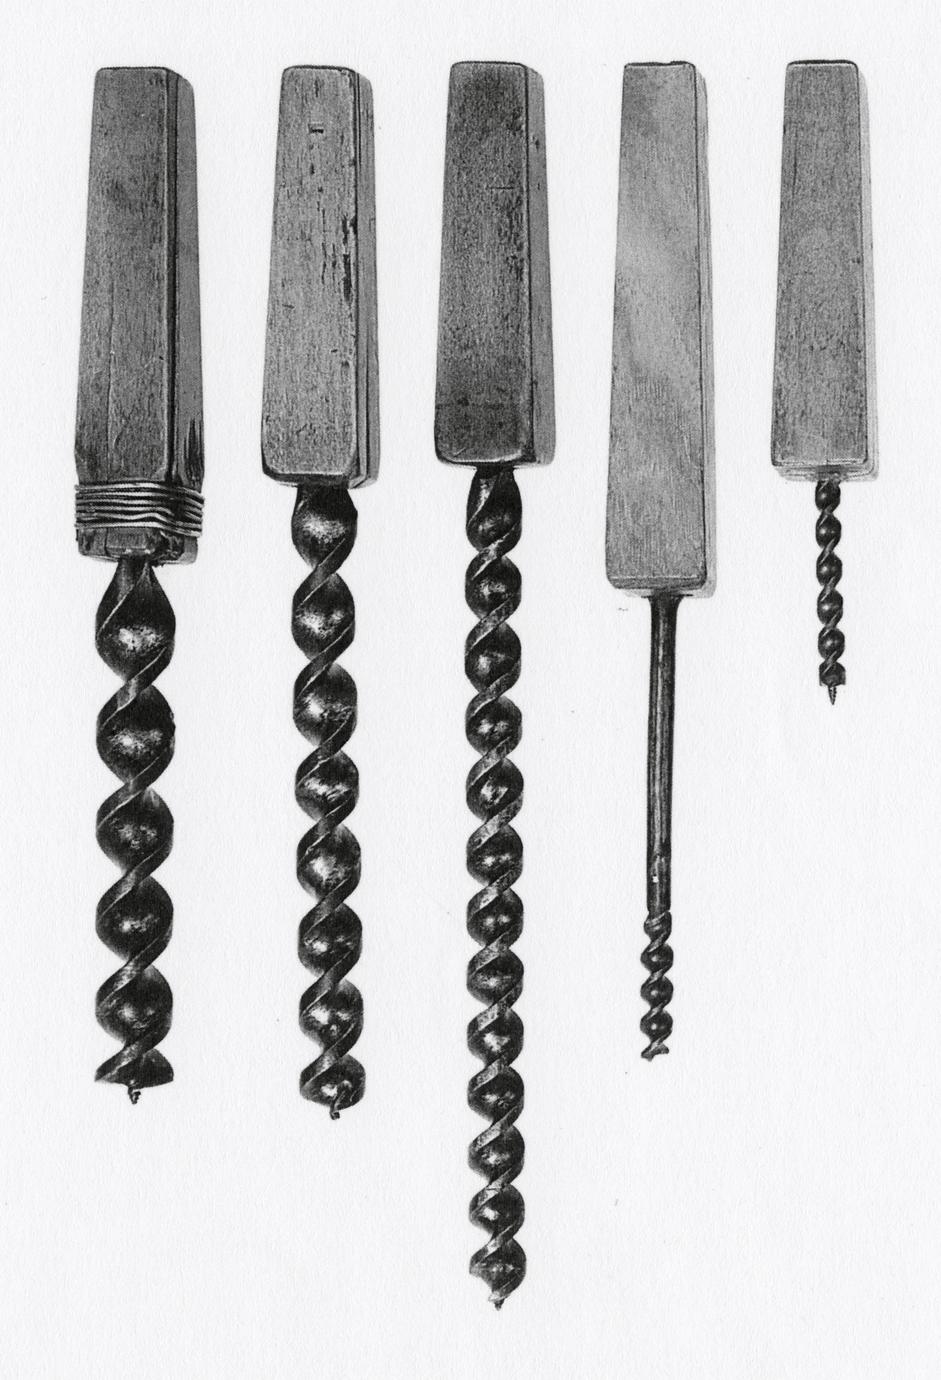 Five examples of spiral bits.